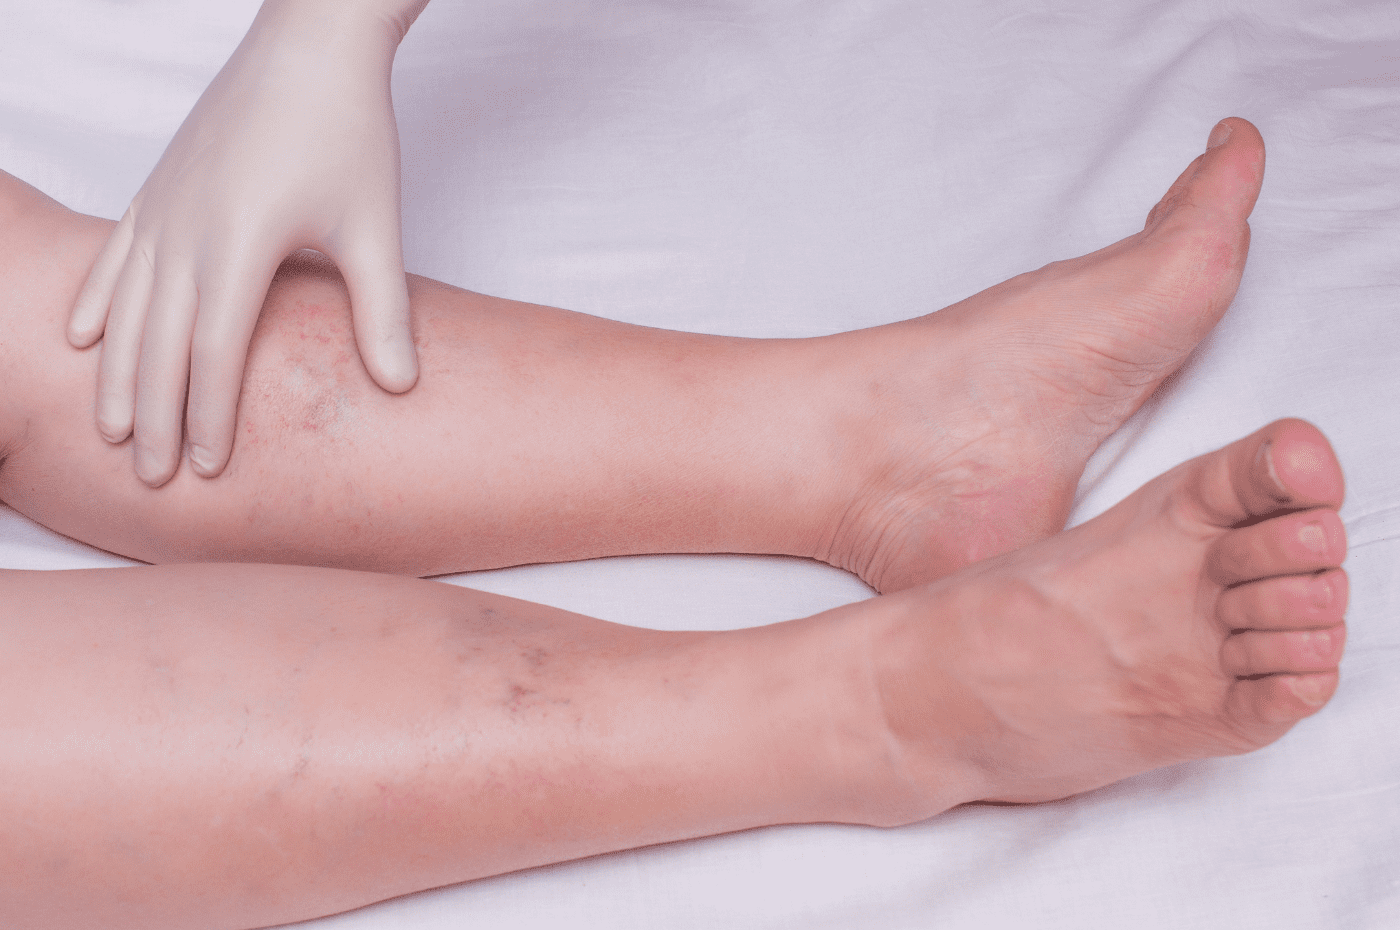 treat vein diseases with vein treatments in york & Lancaster, PA